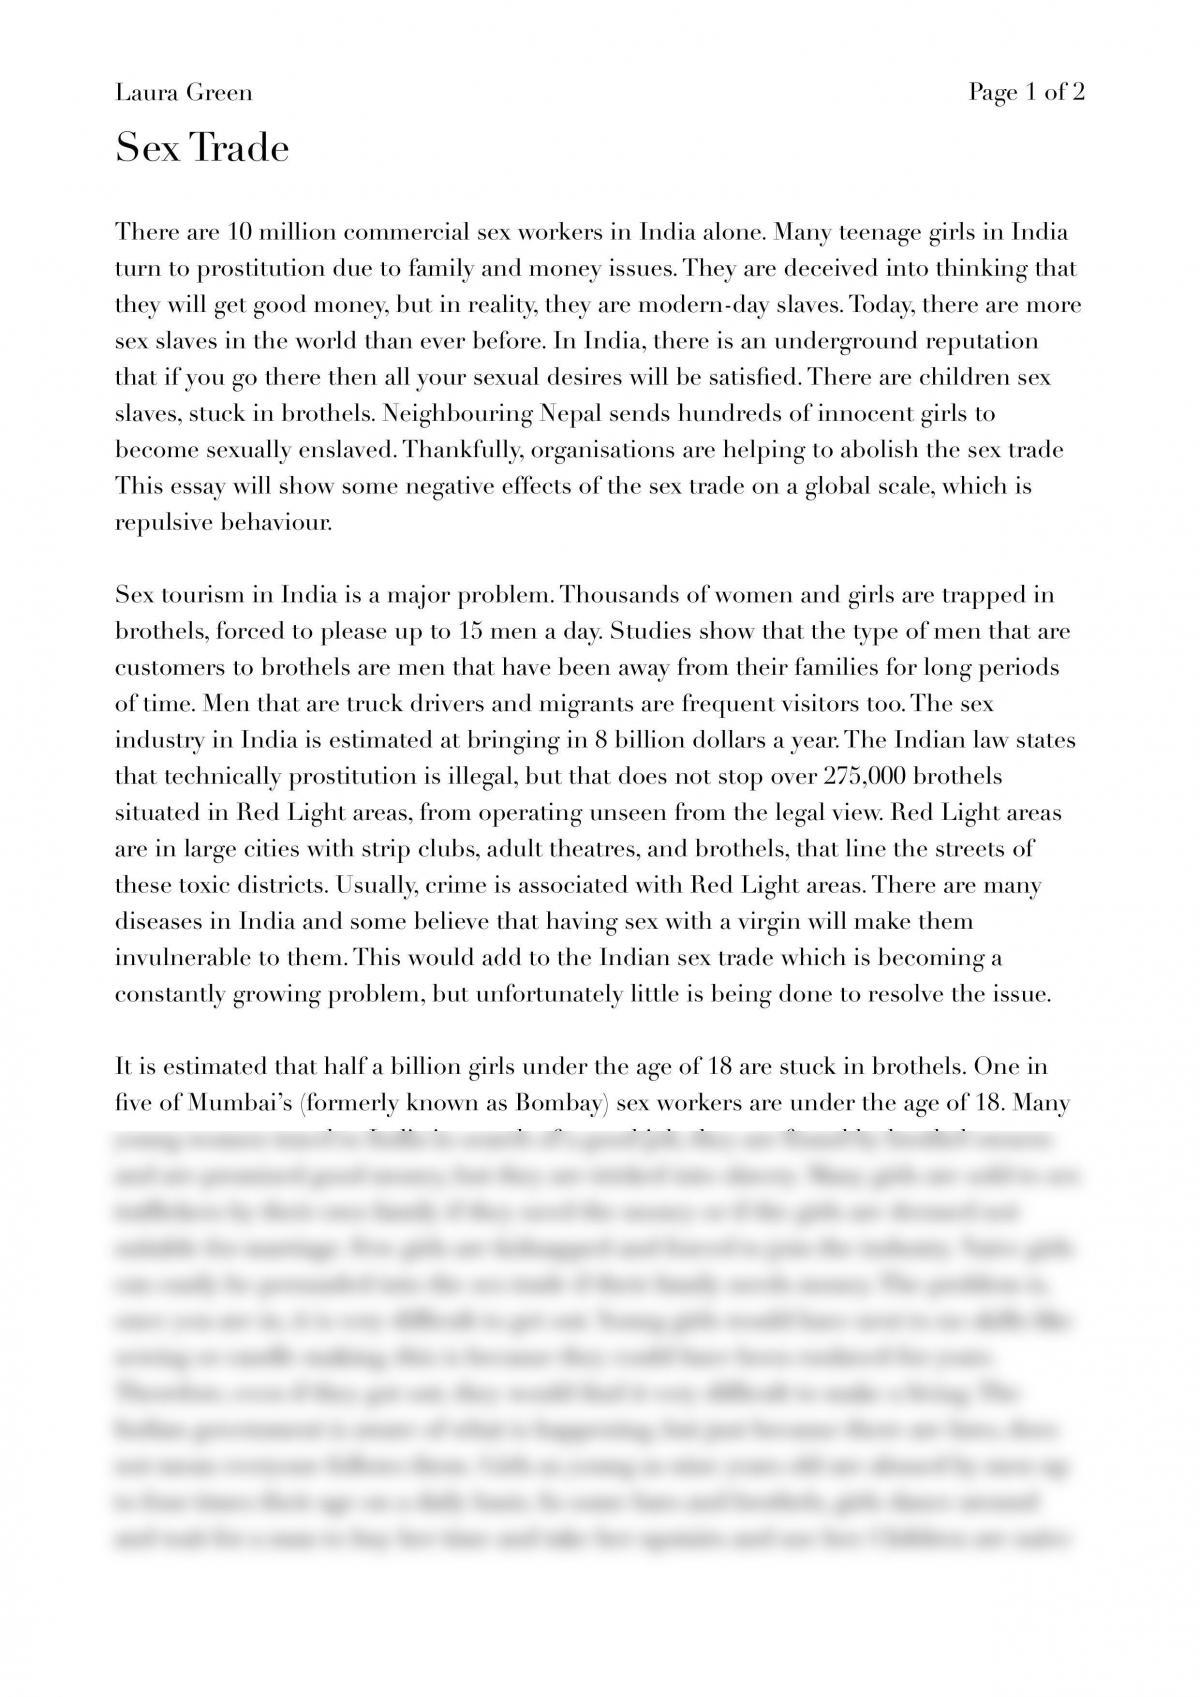 Formal writing piece on the Sex Trade - Page 1